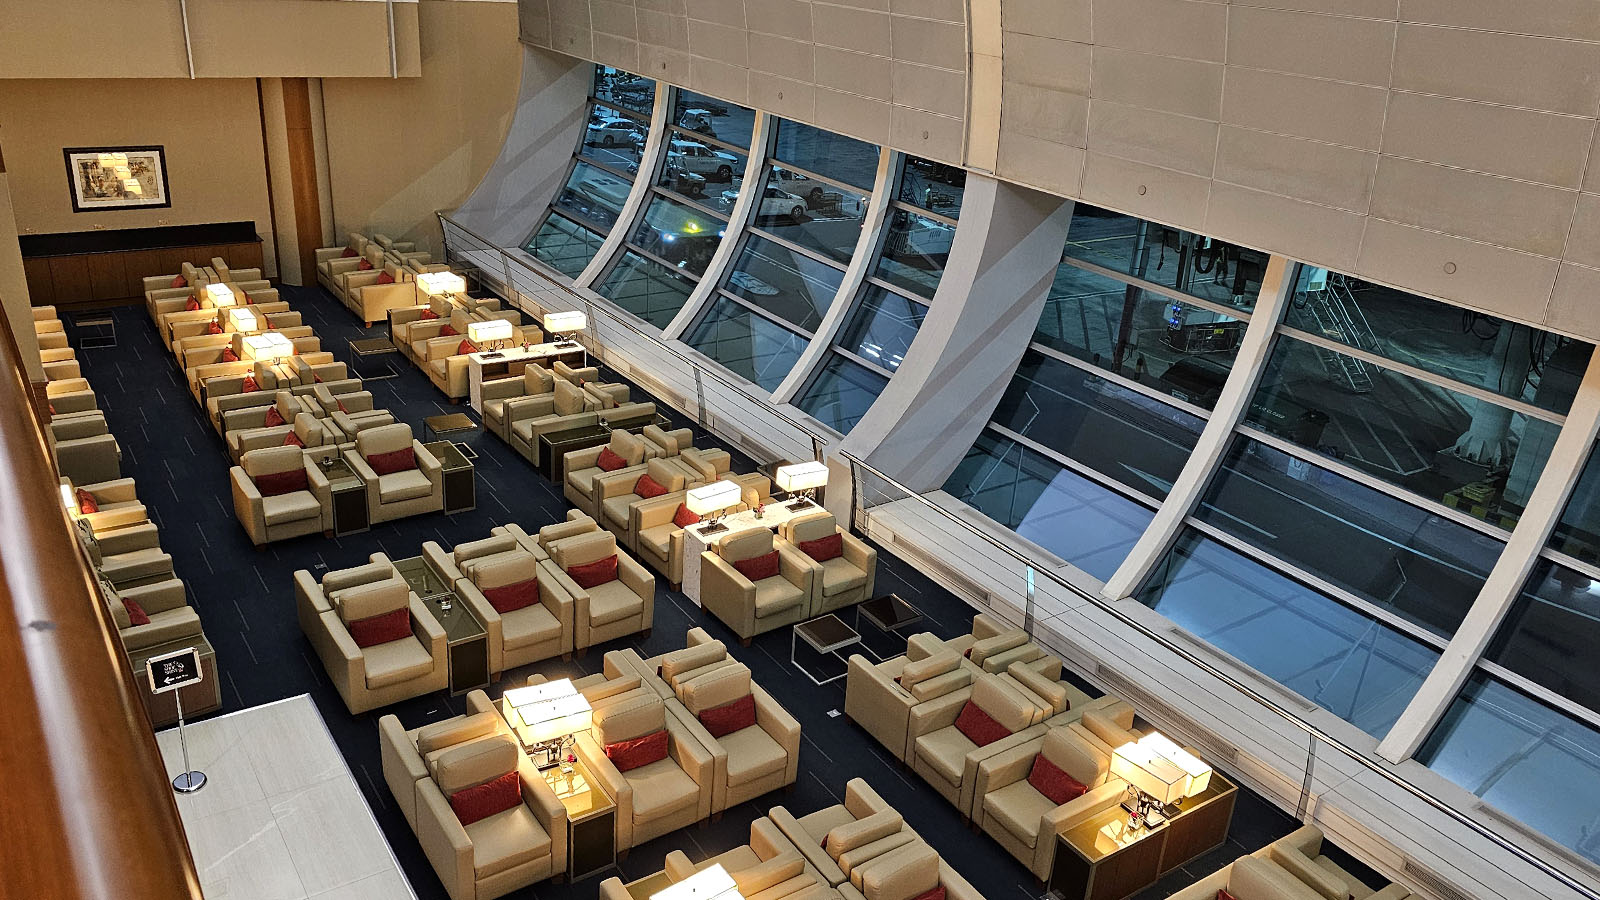 Seating in the Emirates Business Class Lounge, Dubai T3 Concourse C